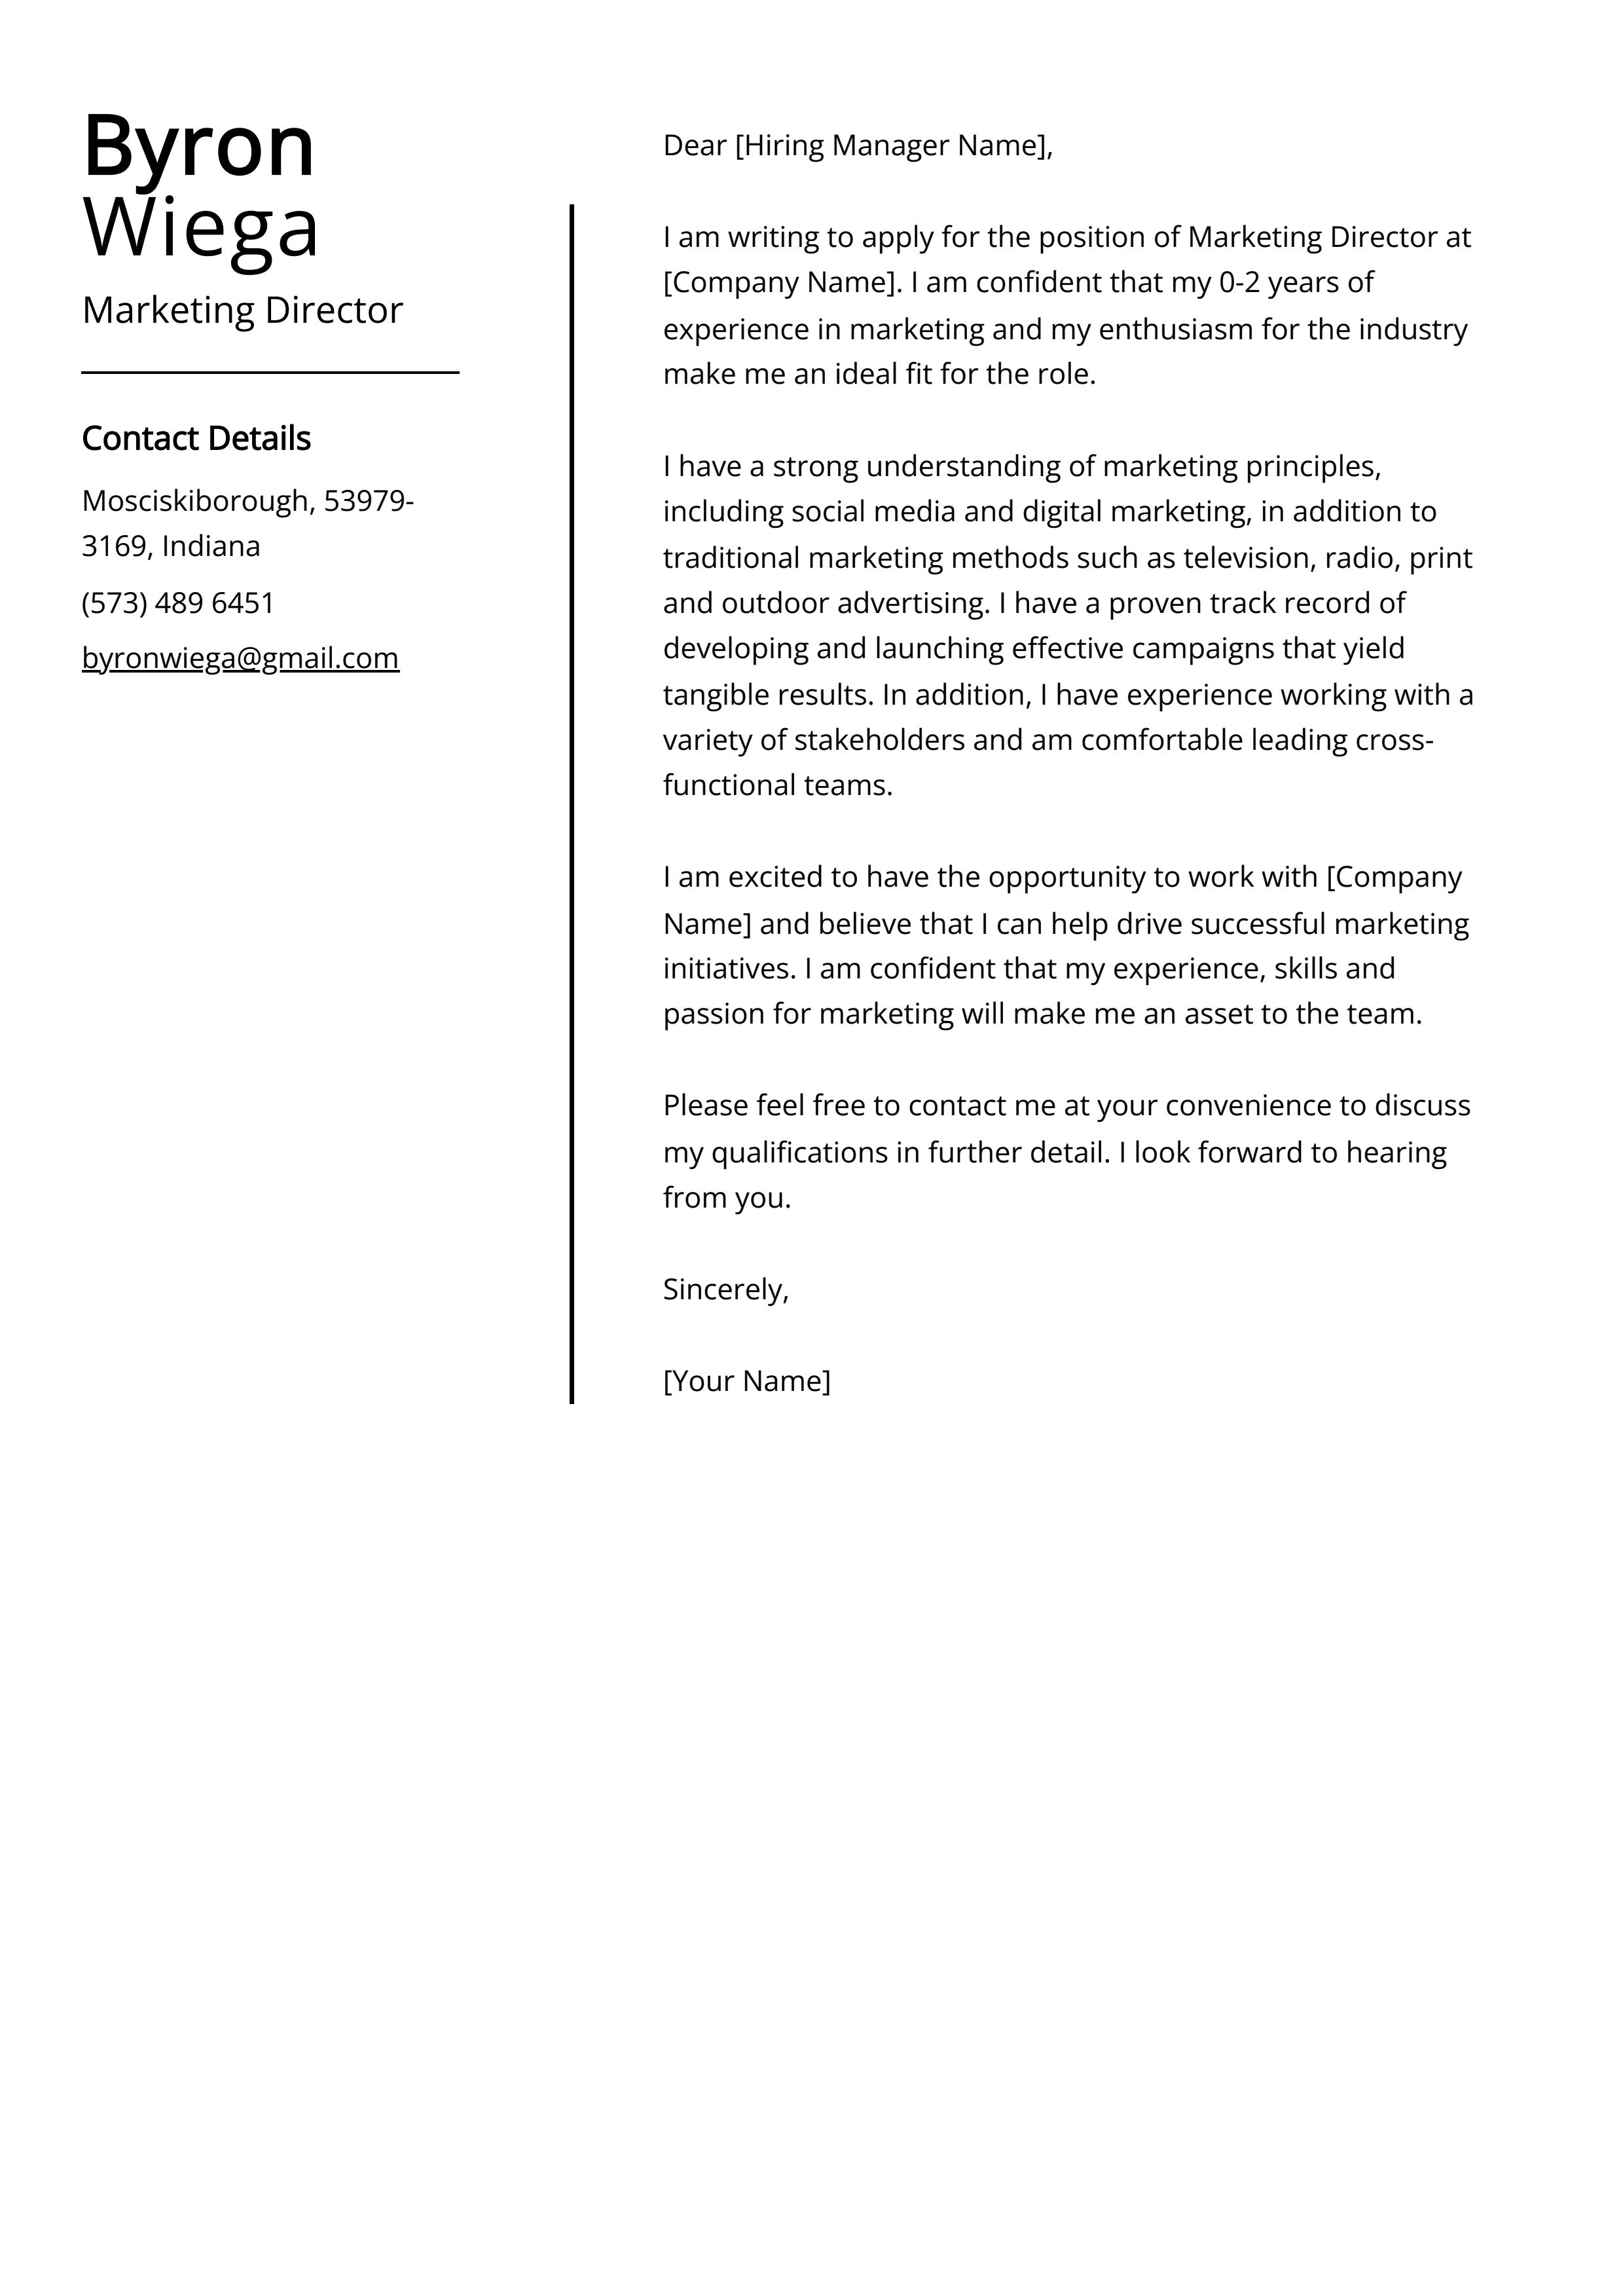 Marketing Director Cover Letter Example